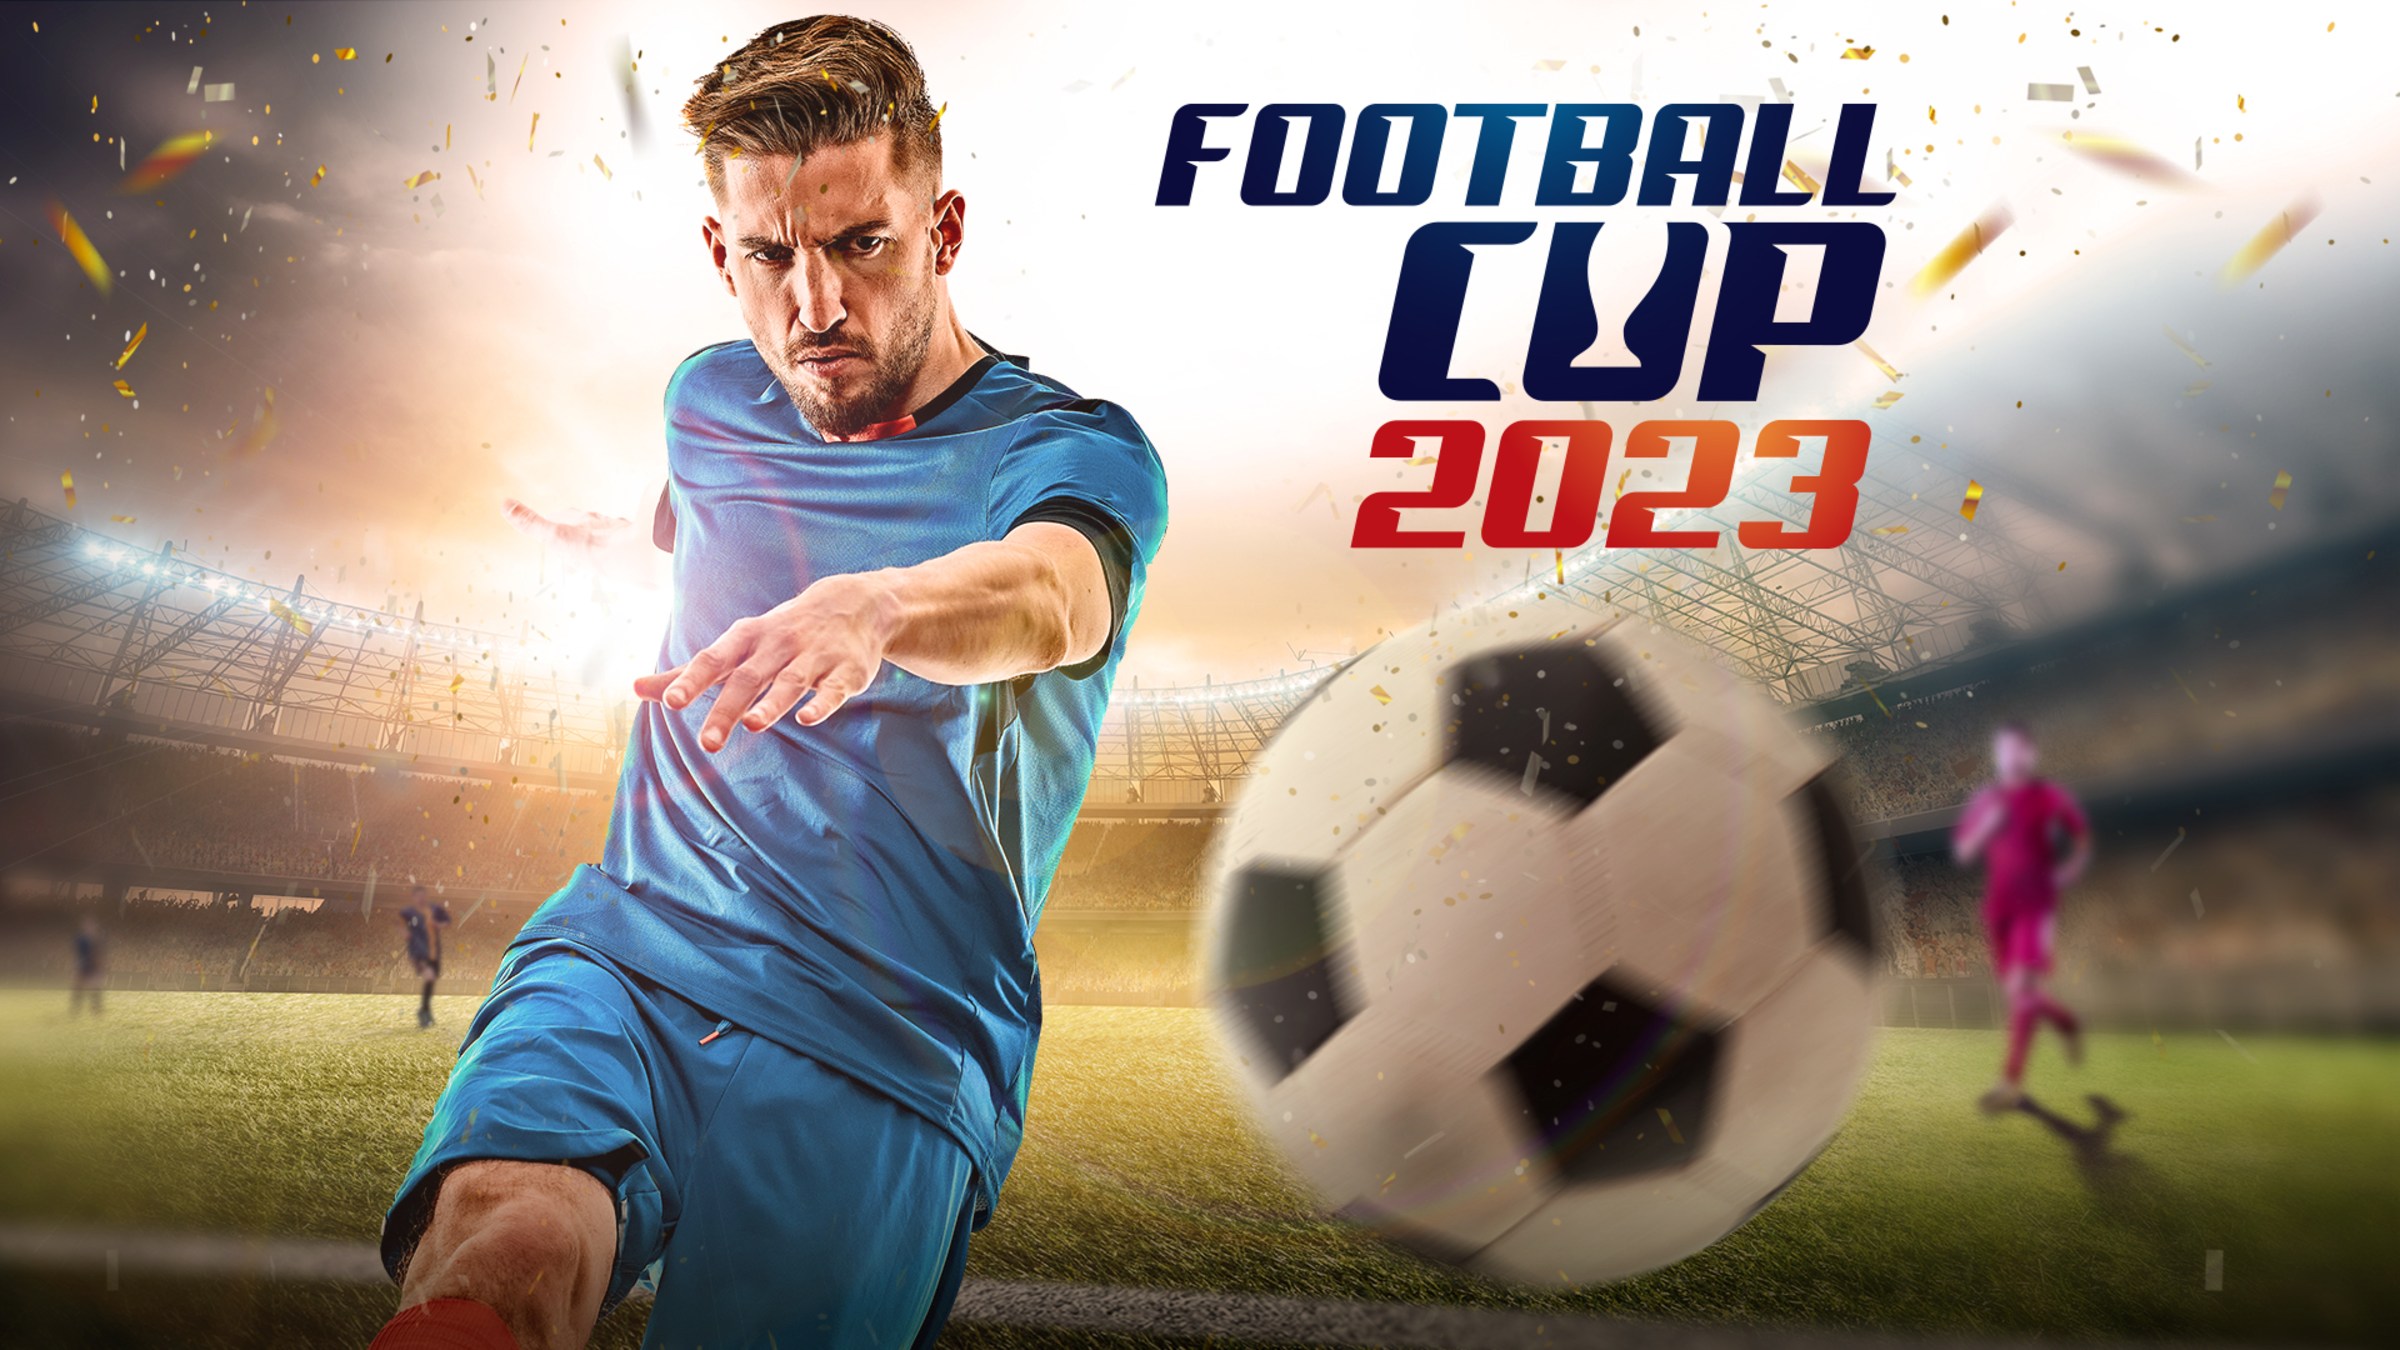 Football Cup 2023 for Nintendo Switch